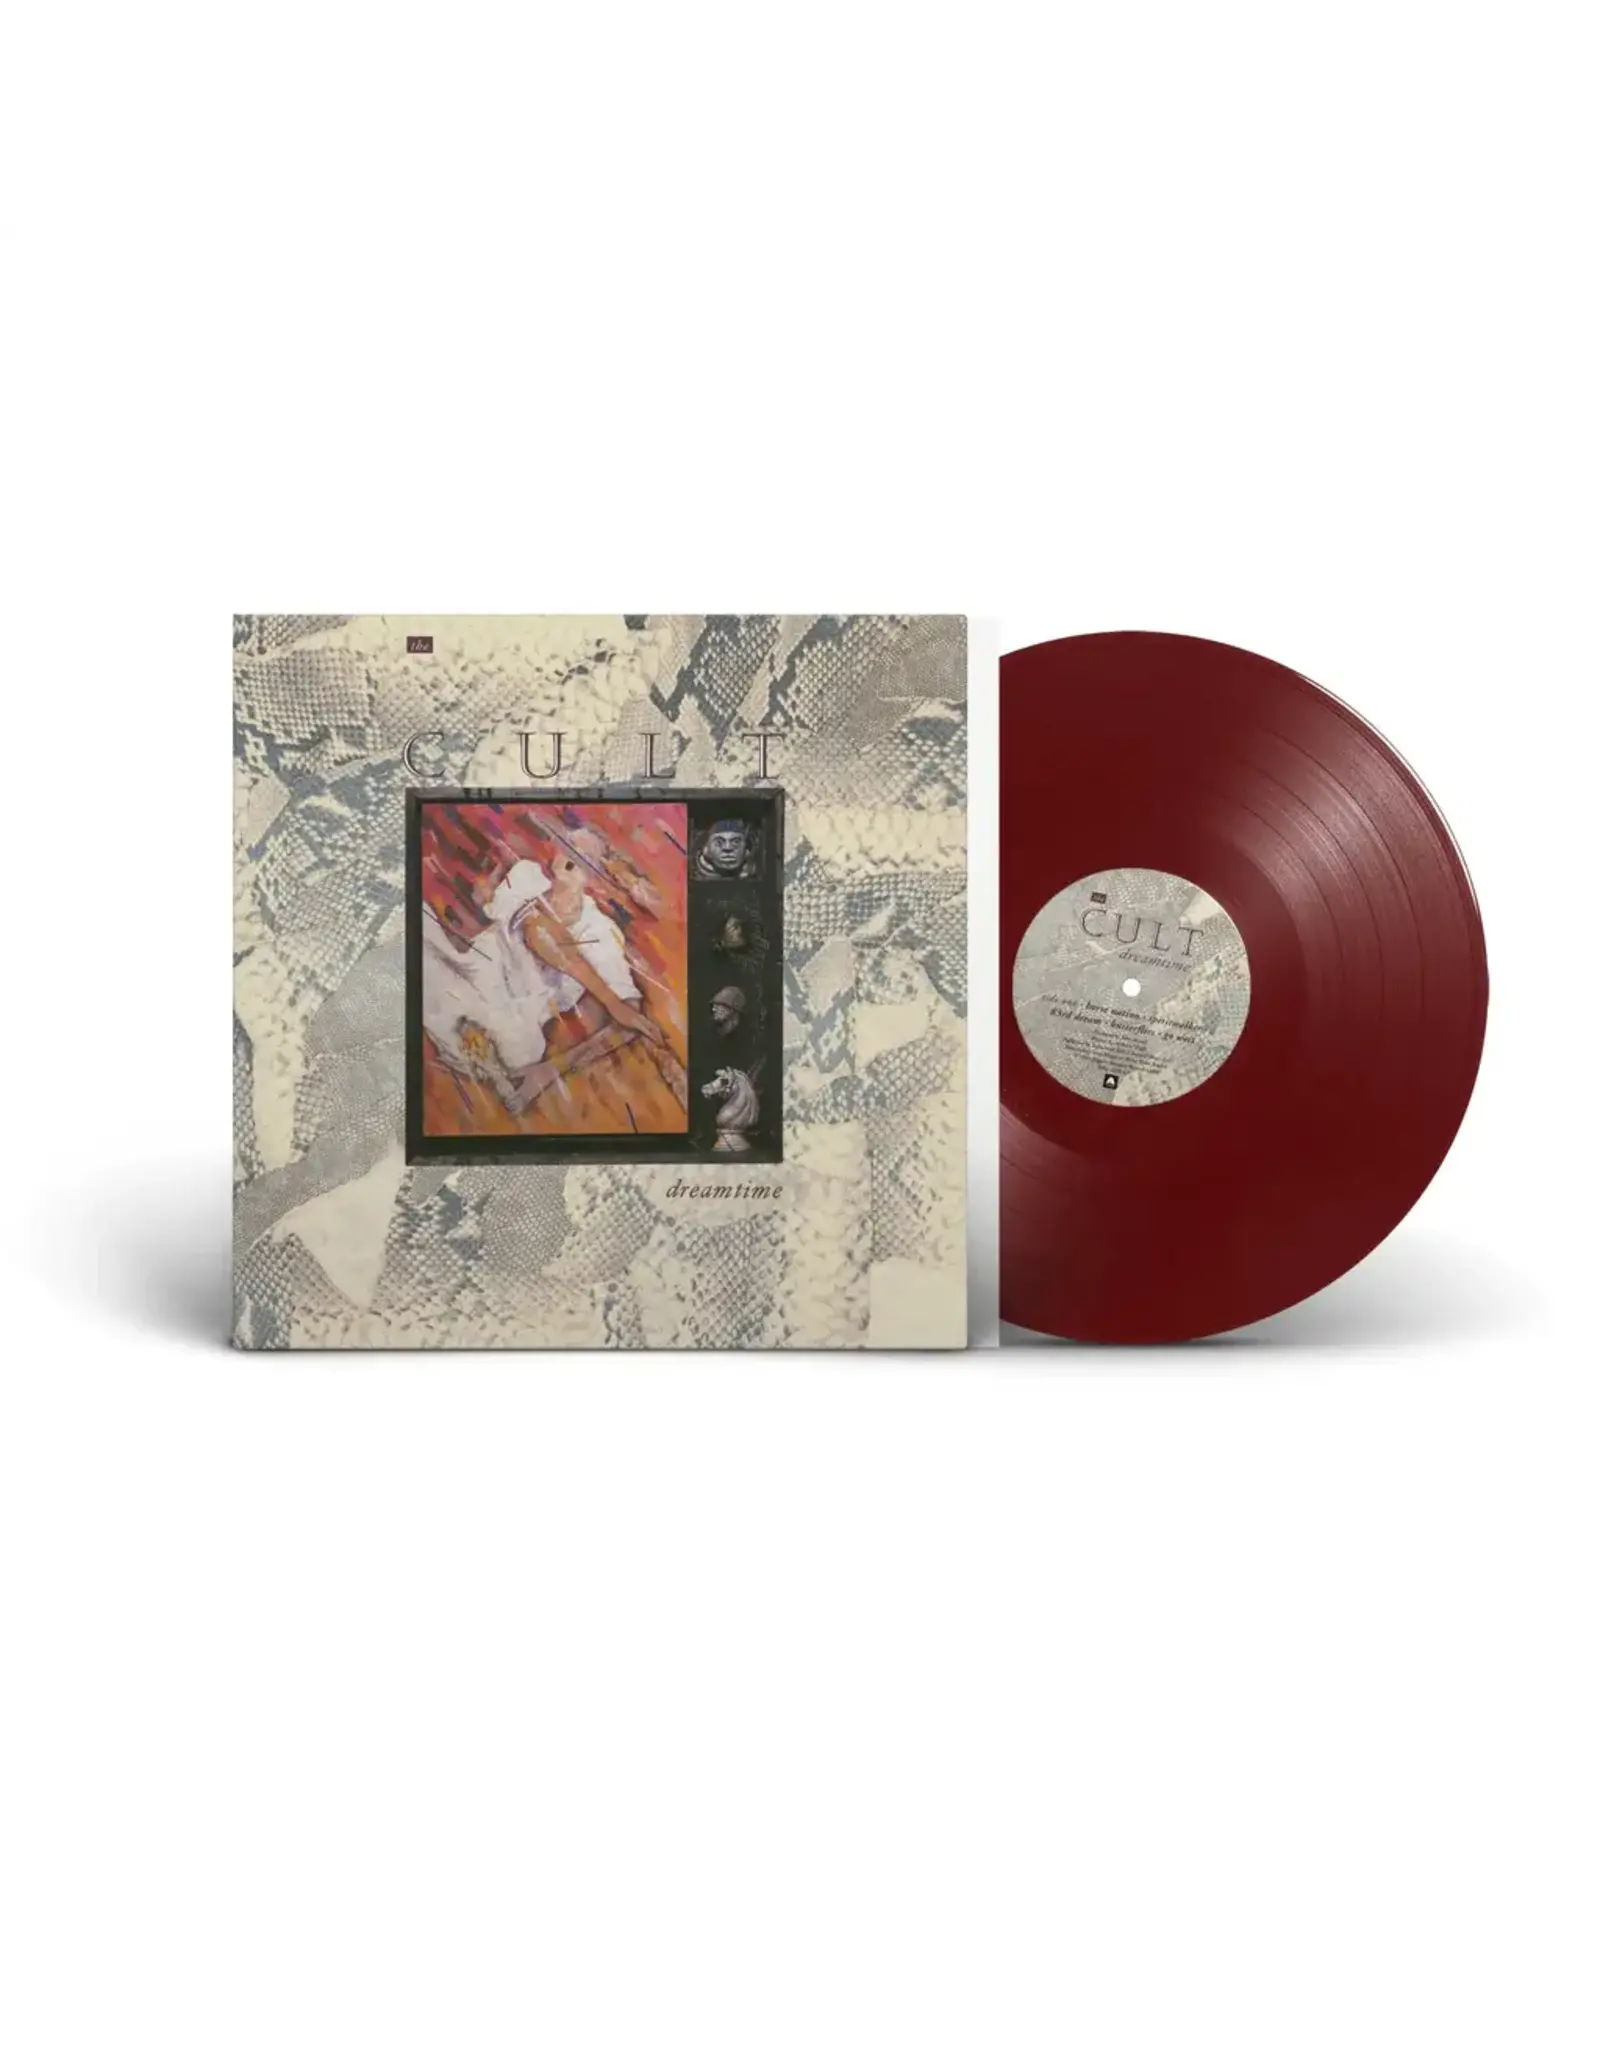 Cult -  Dreamtime (40th Anniversary) [Exclusive Oxblood Red Vinyl]